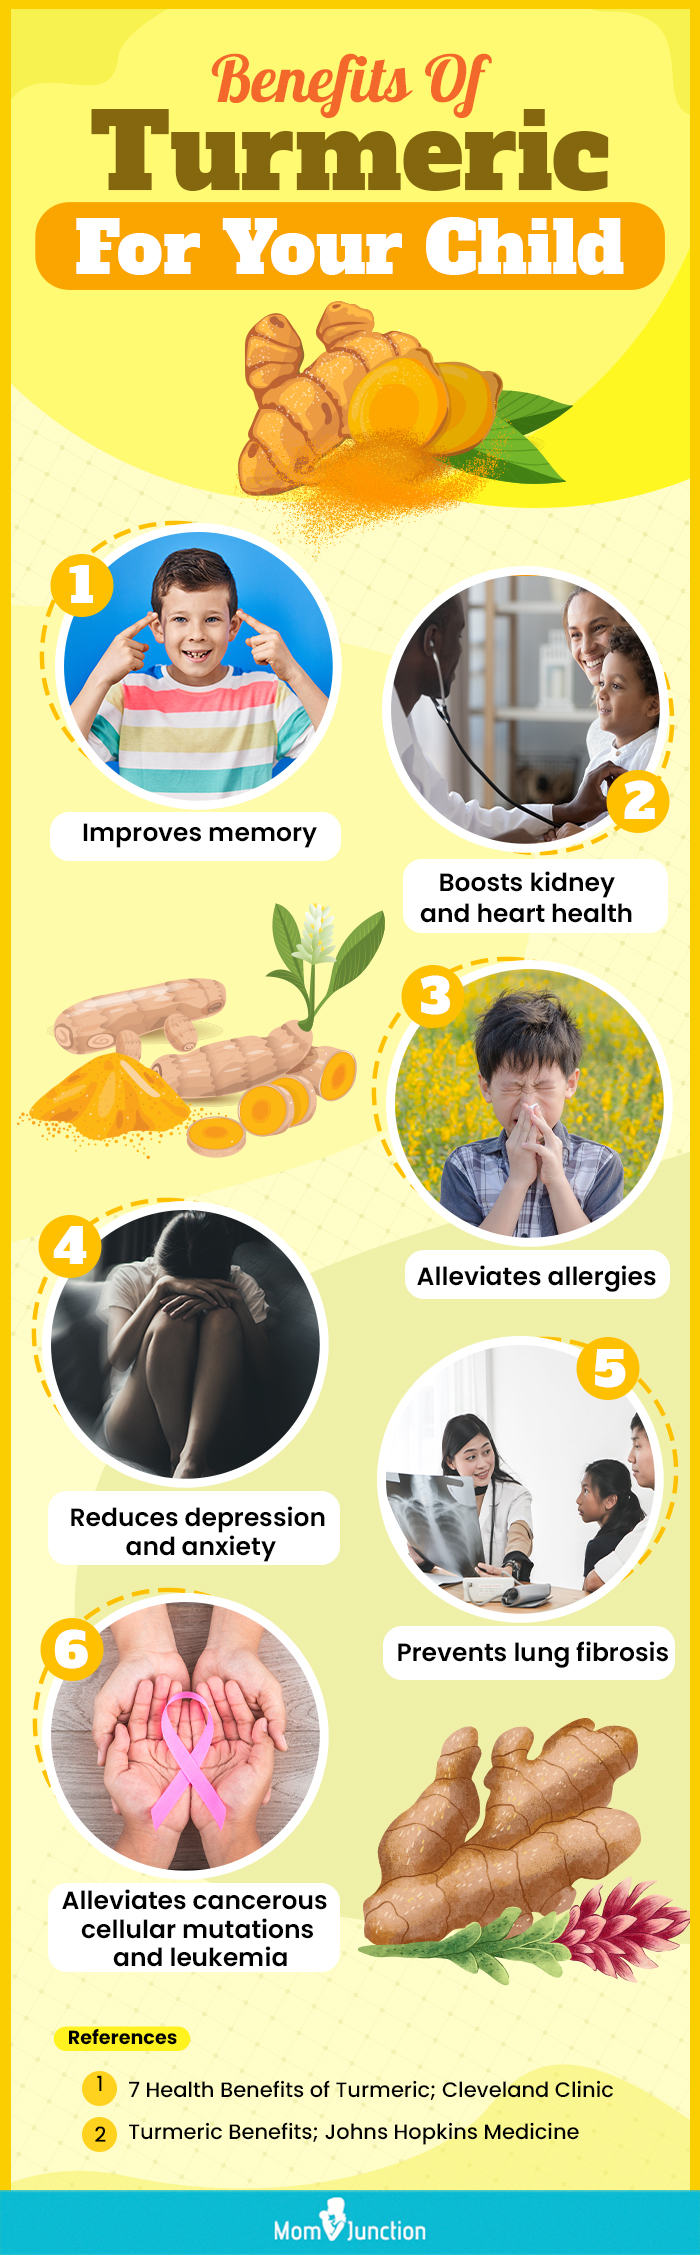 benefits of turmeric for your child (infographic)